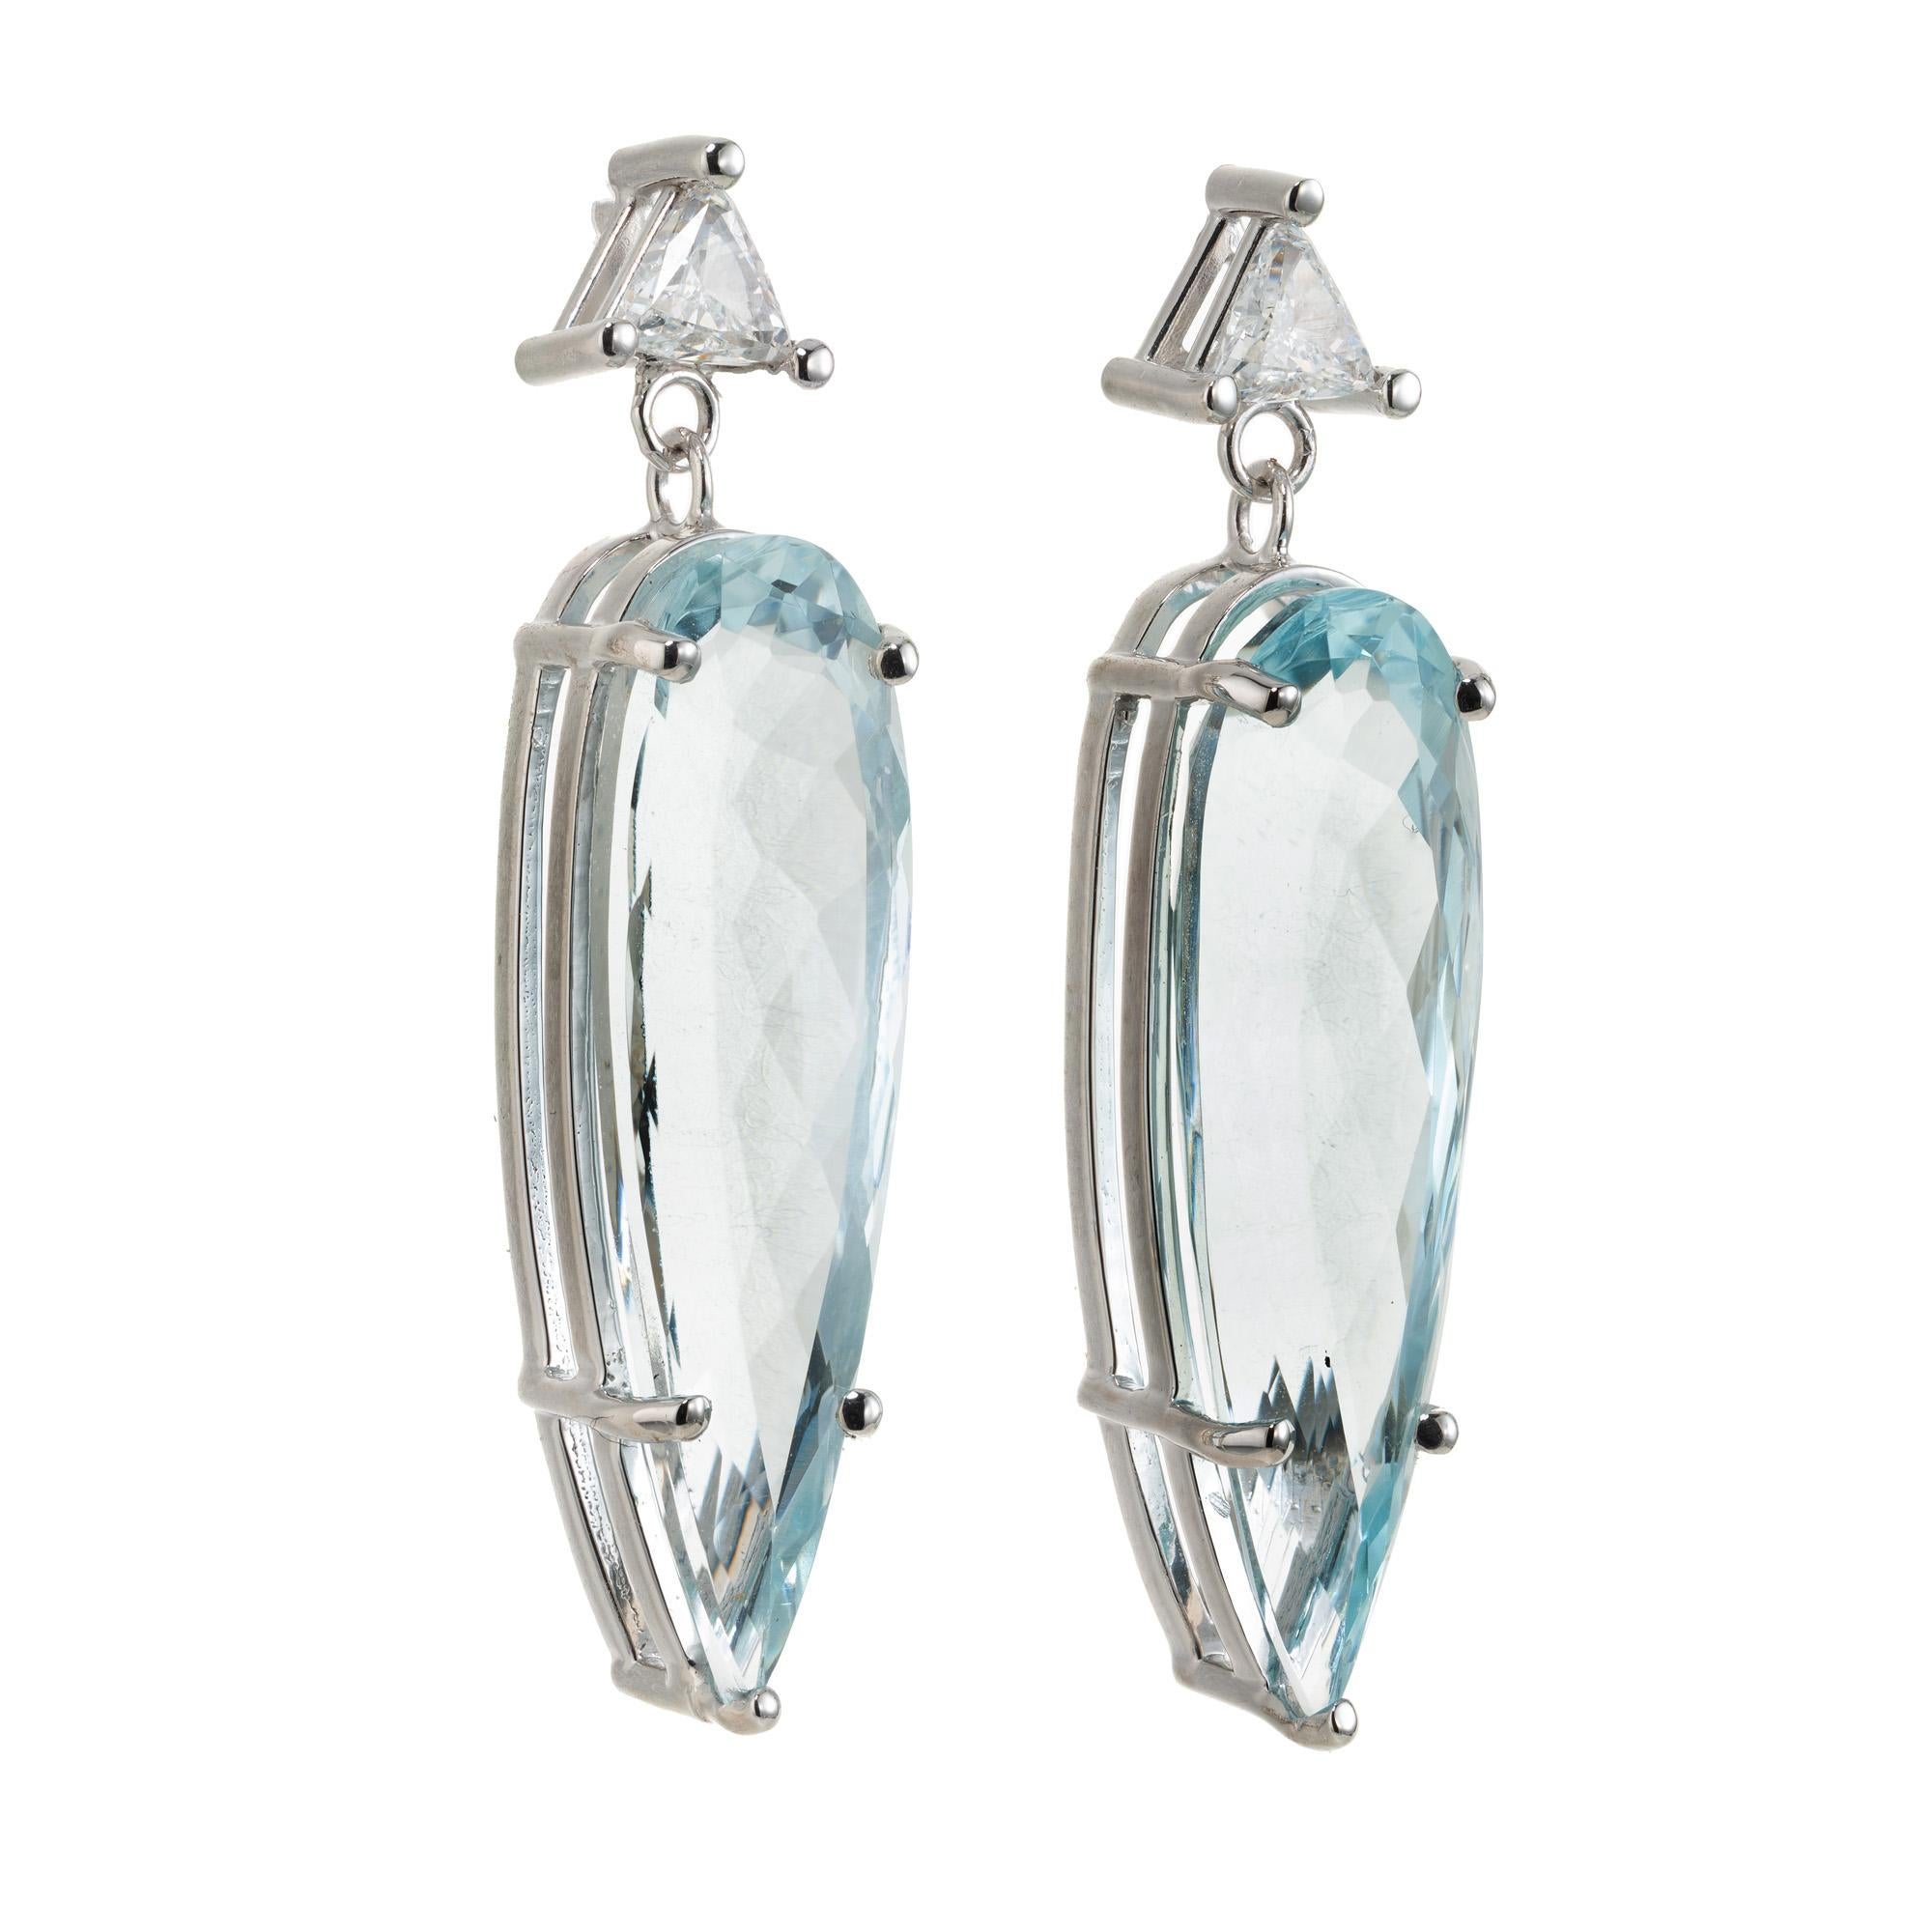 Wonderful matched pair of soft natural blue pear shaped aquamarines circa 1950's fabricated into a classic dangle earrings with trilliant diamond tops.  The focal point of these earrings are the two breathtaking 7.39 carat pear-shaped aquamarine